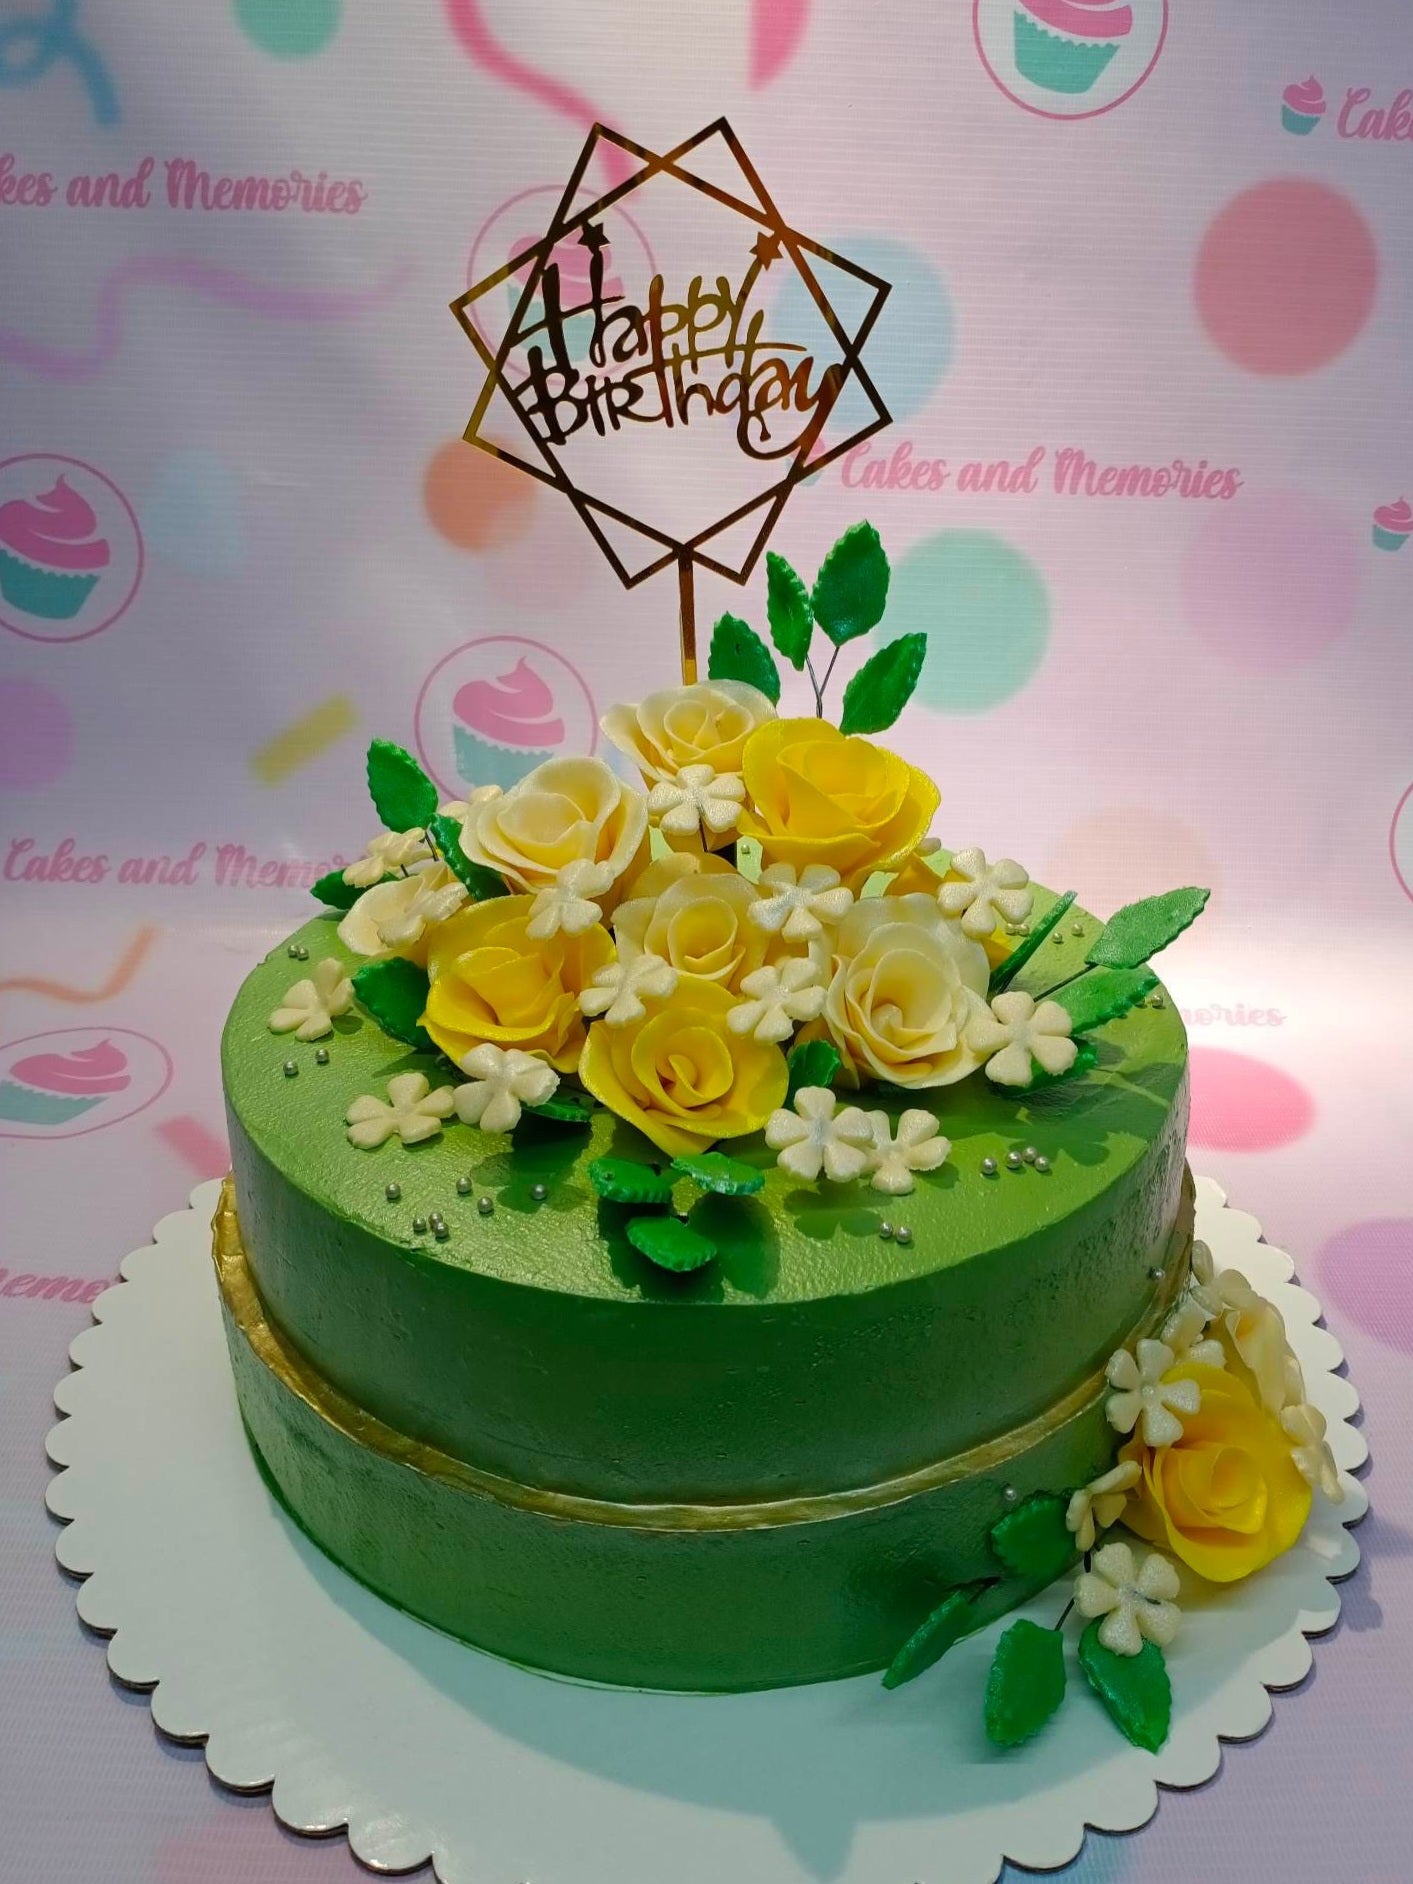 Roses

This stunning custom decorated cake is perfect for a special occasion like an 18th birthday. Beautifully crafted with an array of green, yellow and gold flowers, this floral cake is ideal for celebrating a 50th birthday or honoring a special mother. Every flower is professionally placed, ensuring an elegant and sophisticated look that is sure to impress.